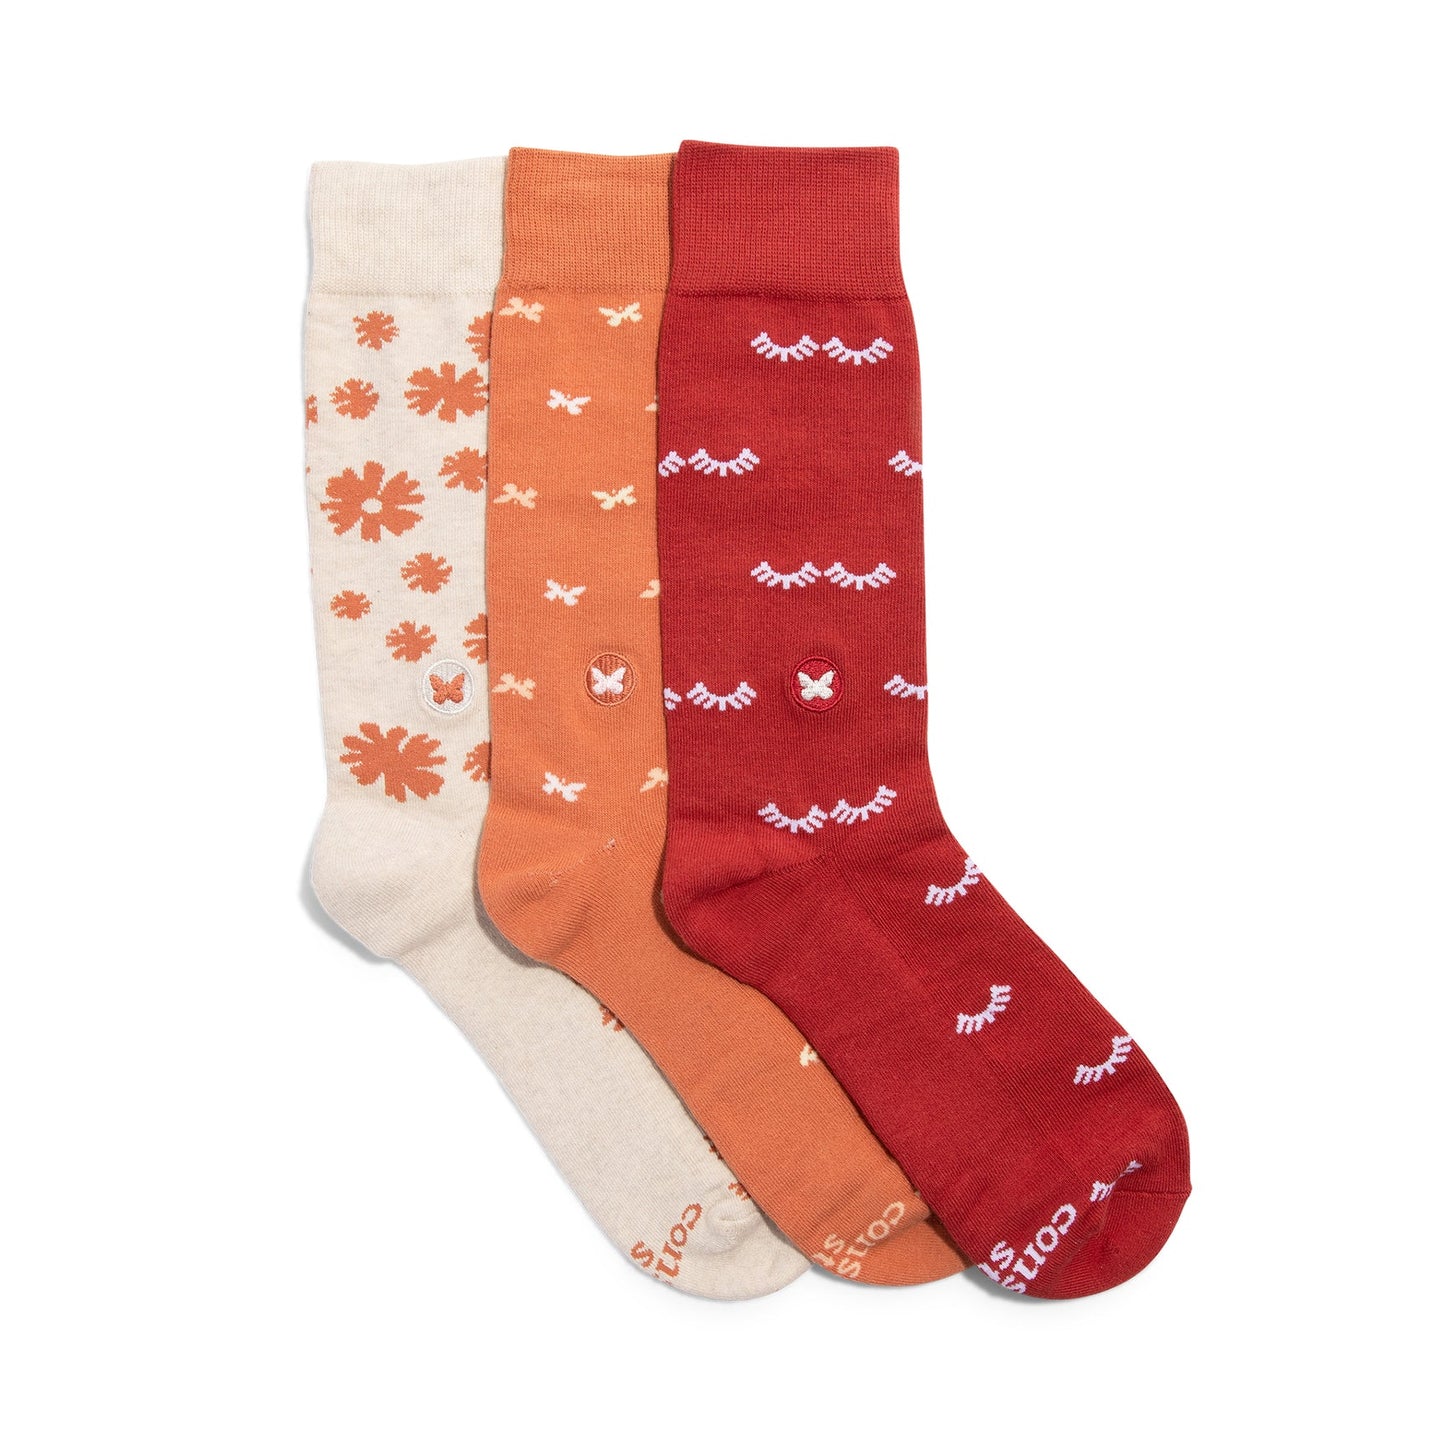 Conscious Step - Gift Box: Socks that Stop Violence against Women